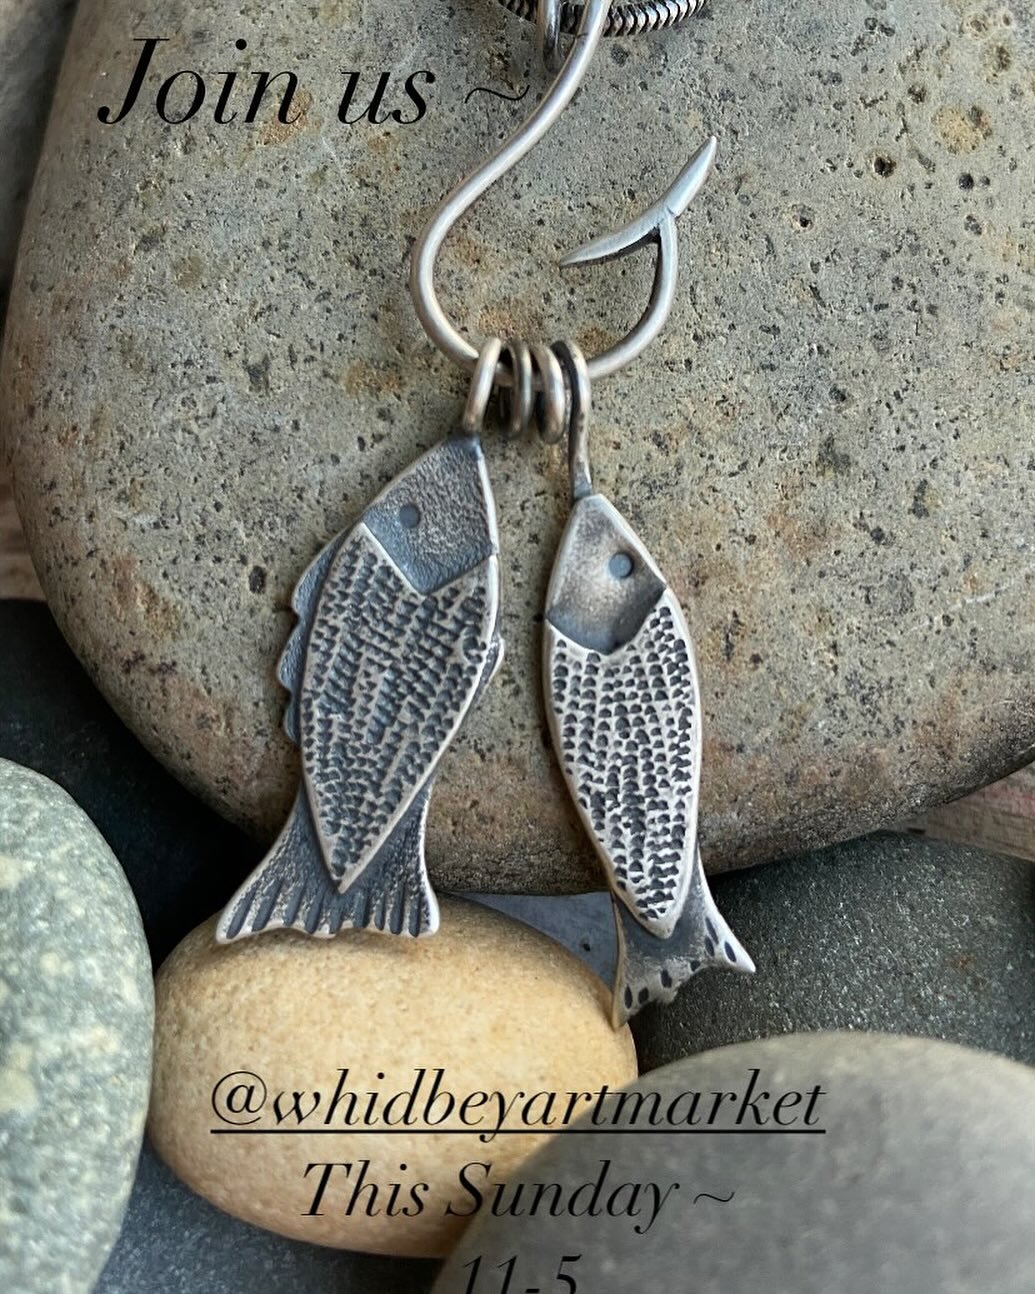 Join us @whidbeyartmarket on Mother&rsquo;s Day if you&rsquo;re on Whidbey Island. We&rsquo;ll be at the Coupeville Rec Hall from 11-5.

#whidbeyartists #whidbeyislandrocks #mothersdaygifts